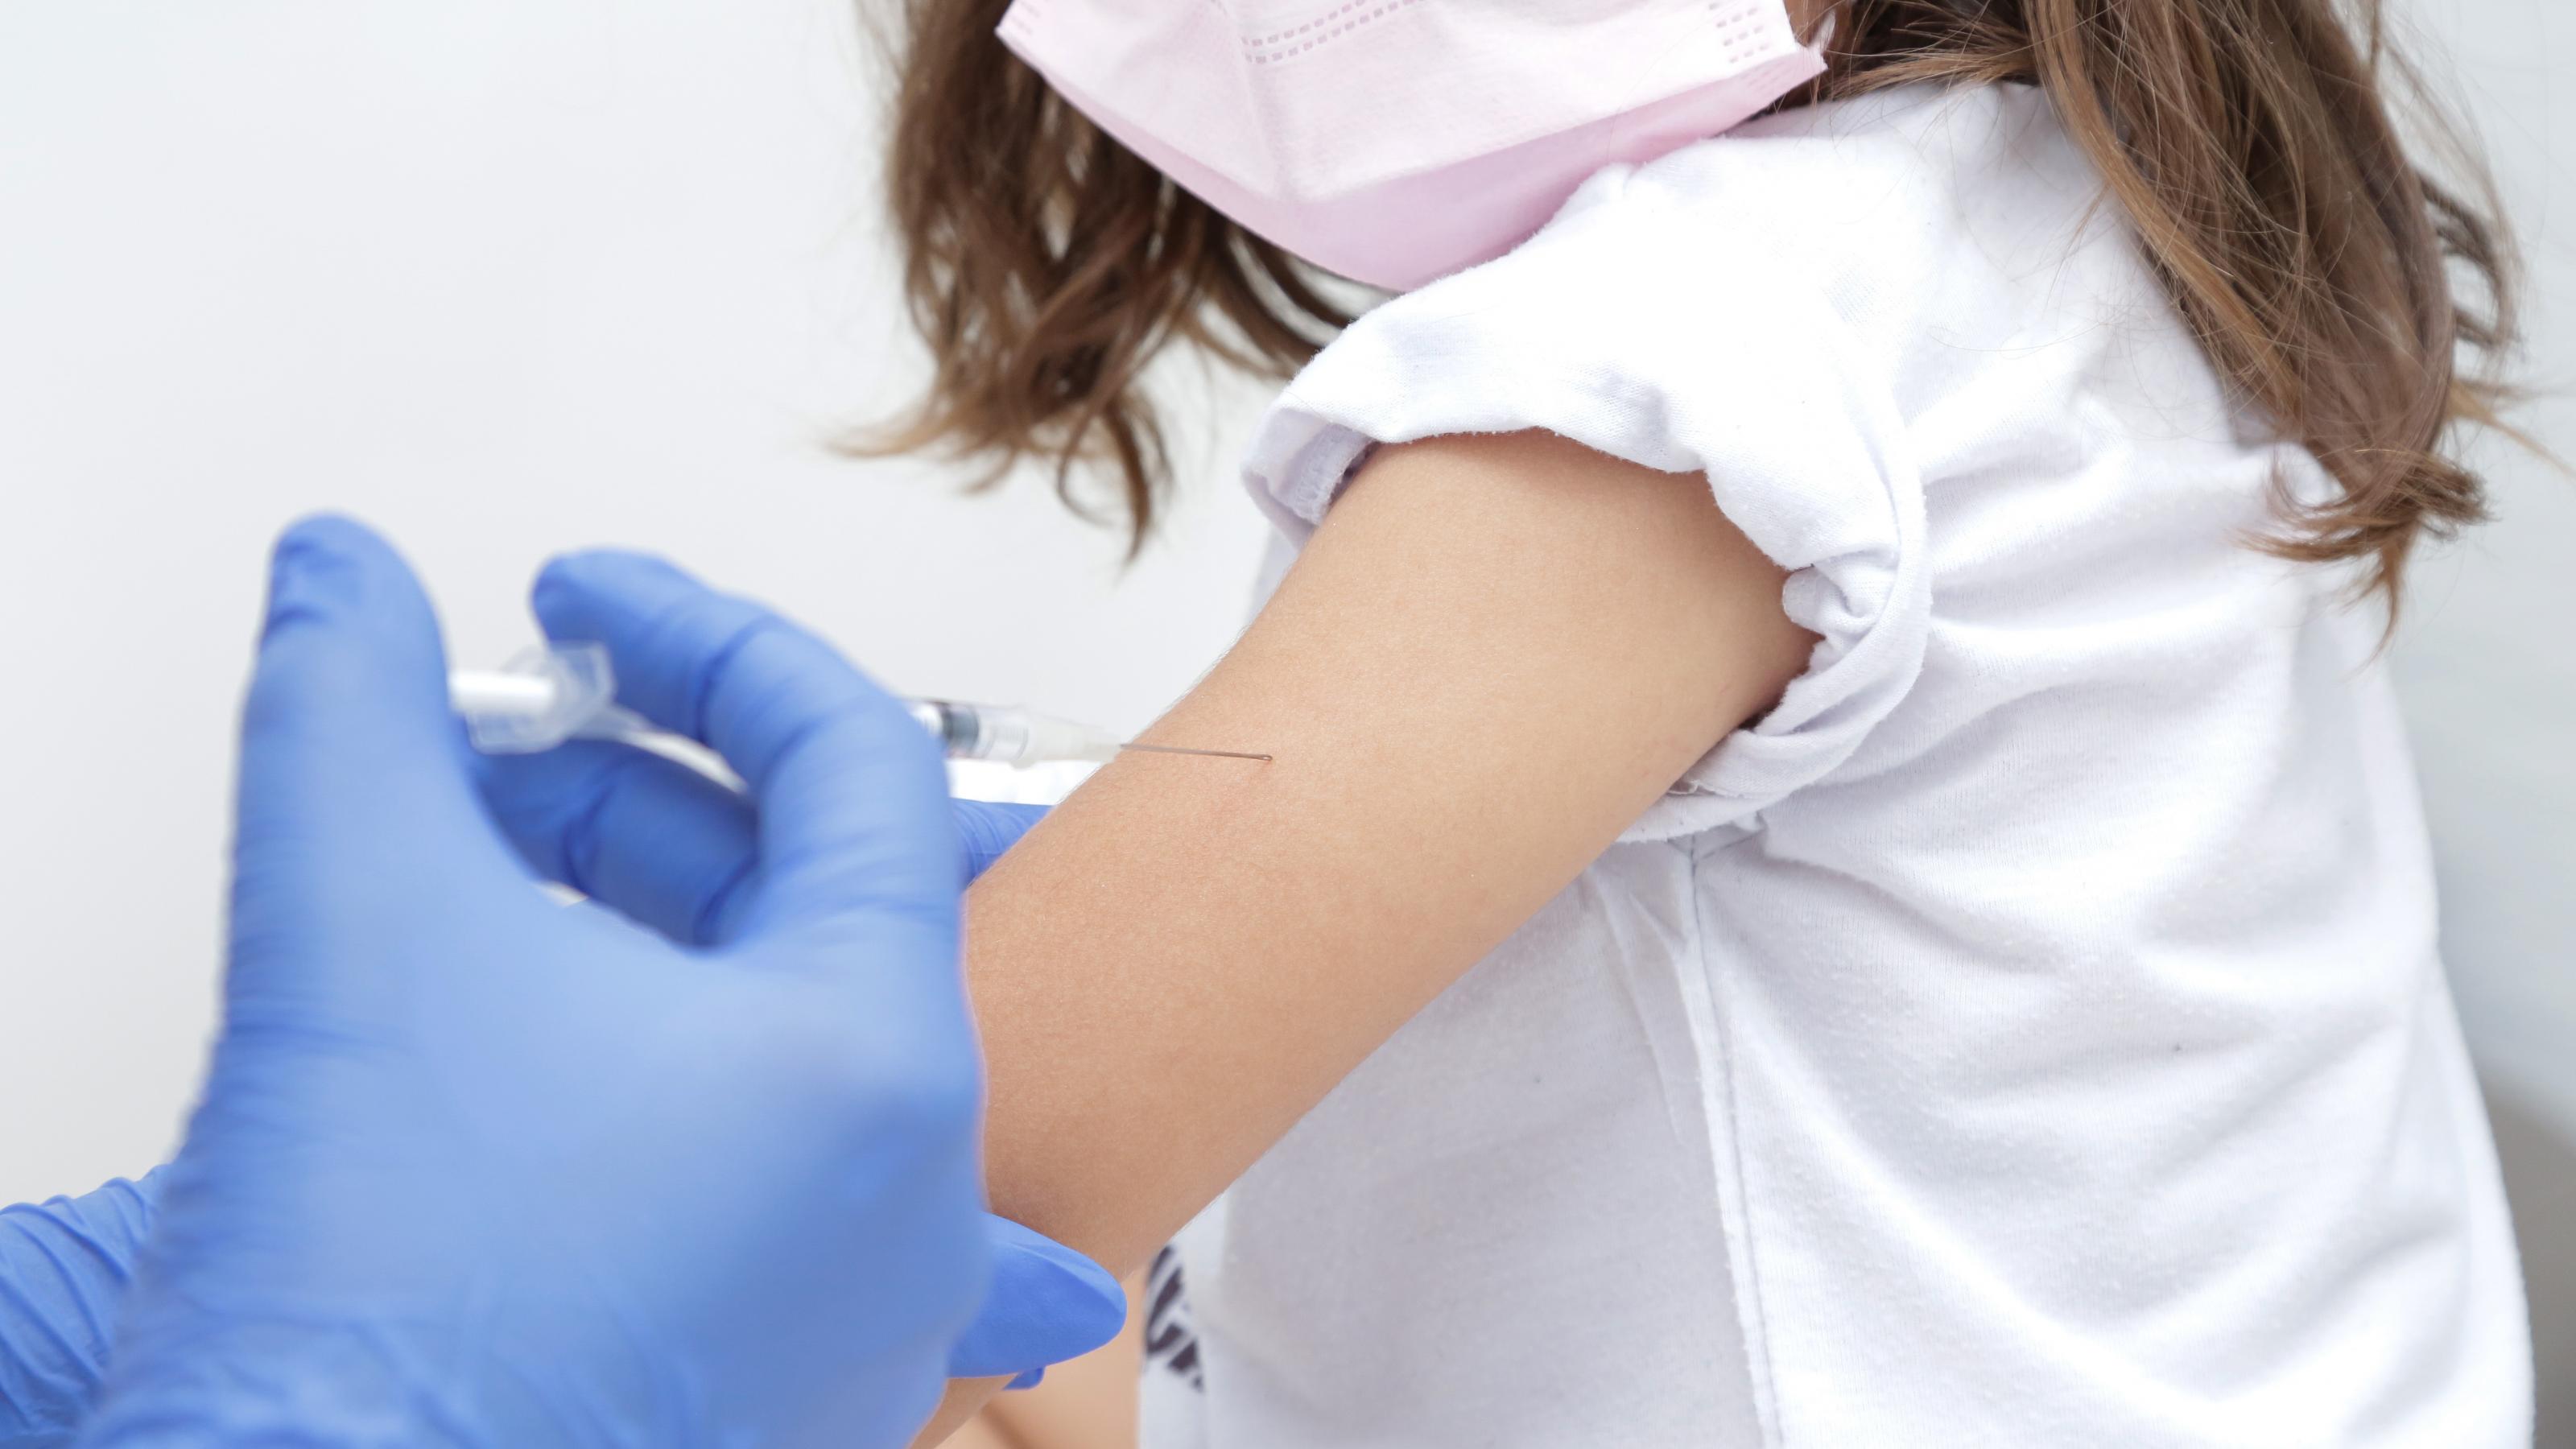 A girl in a white shirt is vaccinated against Covid-19.